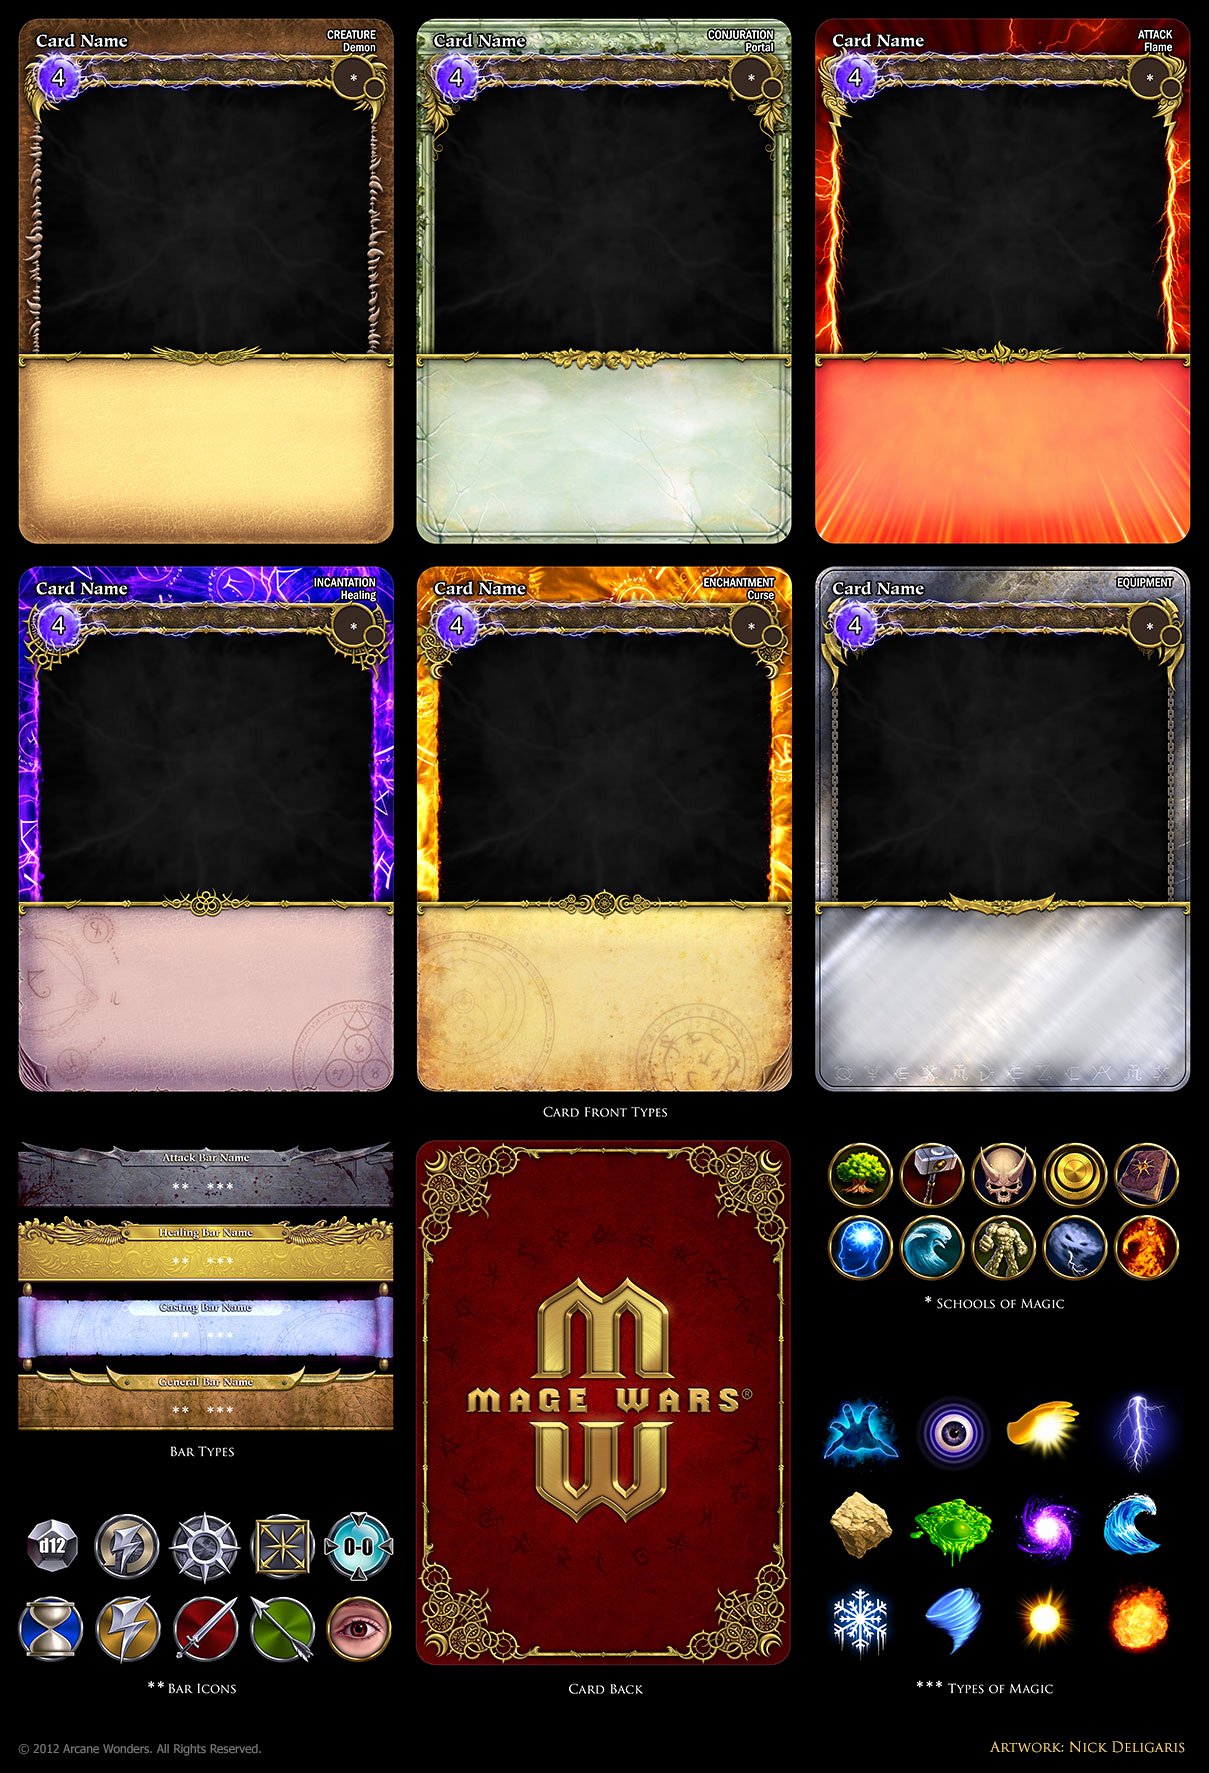 Trading Card Game Template New Mage Wars Card assets by Deligaris On Deviantart